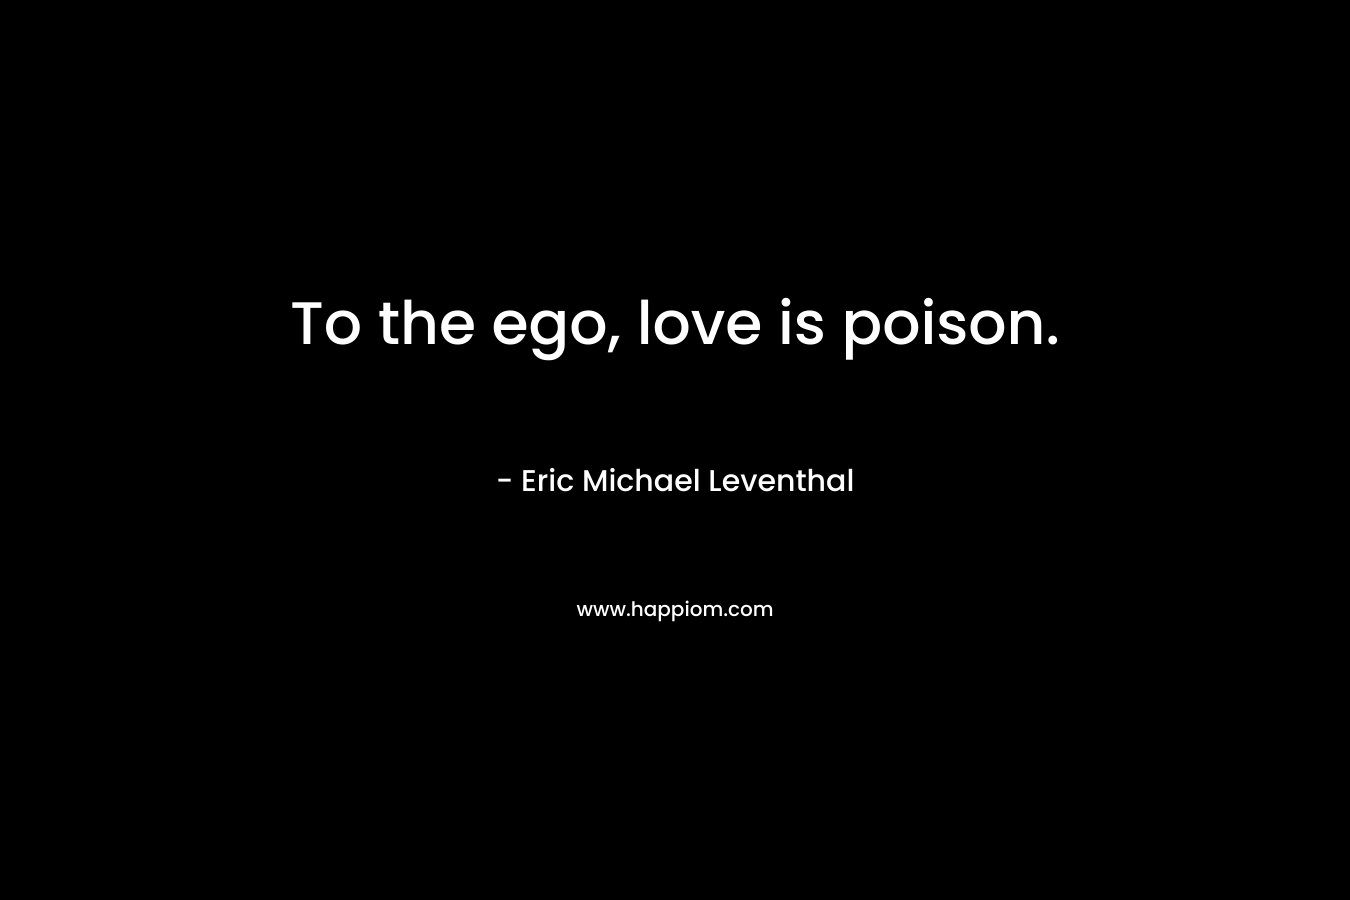 To the ego, love is poison.